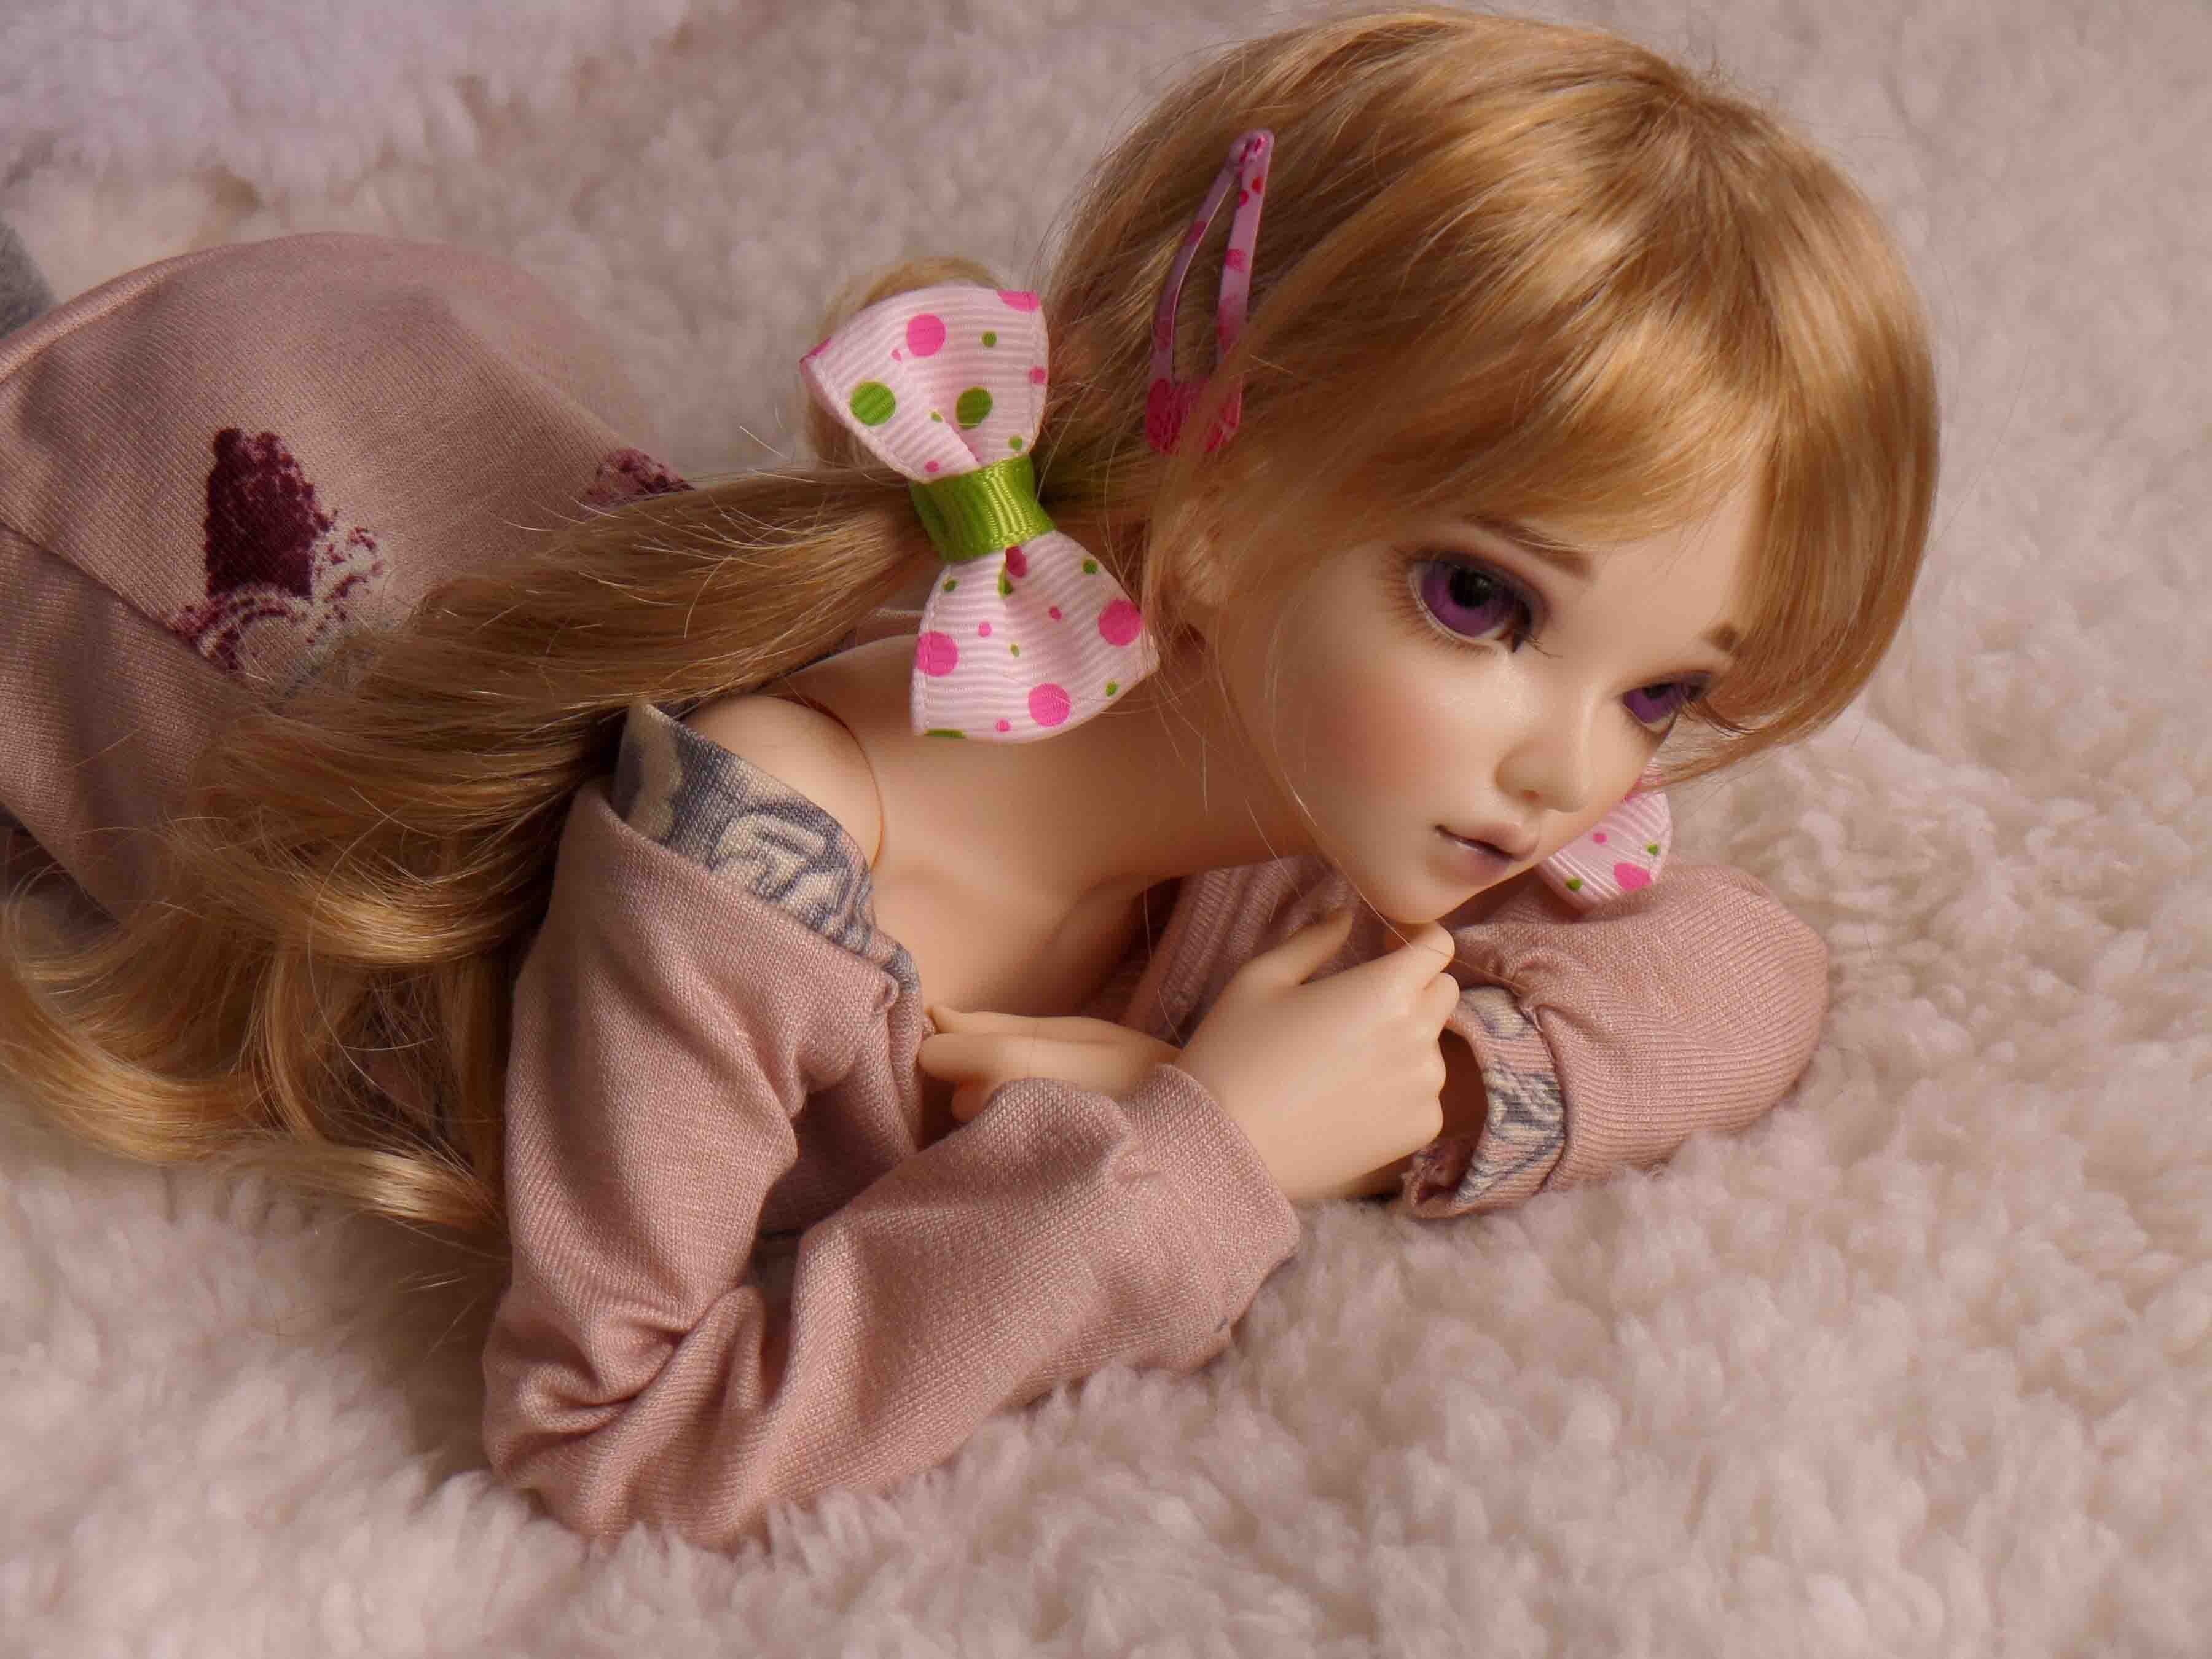 Barbie Doll Wallpapers For Whatsapp Most Beautiful Barbie